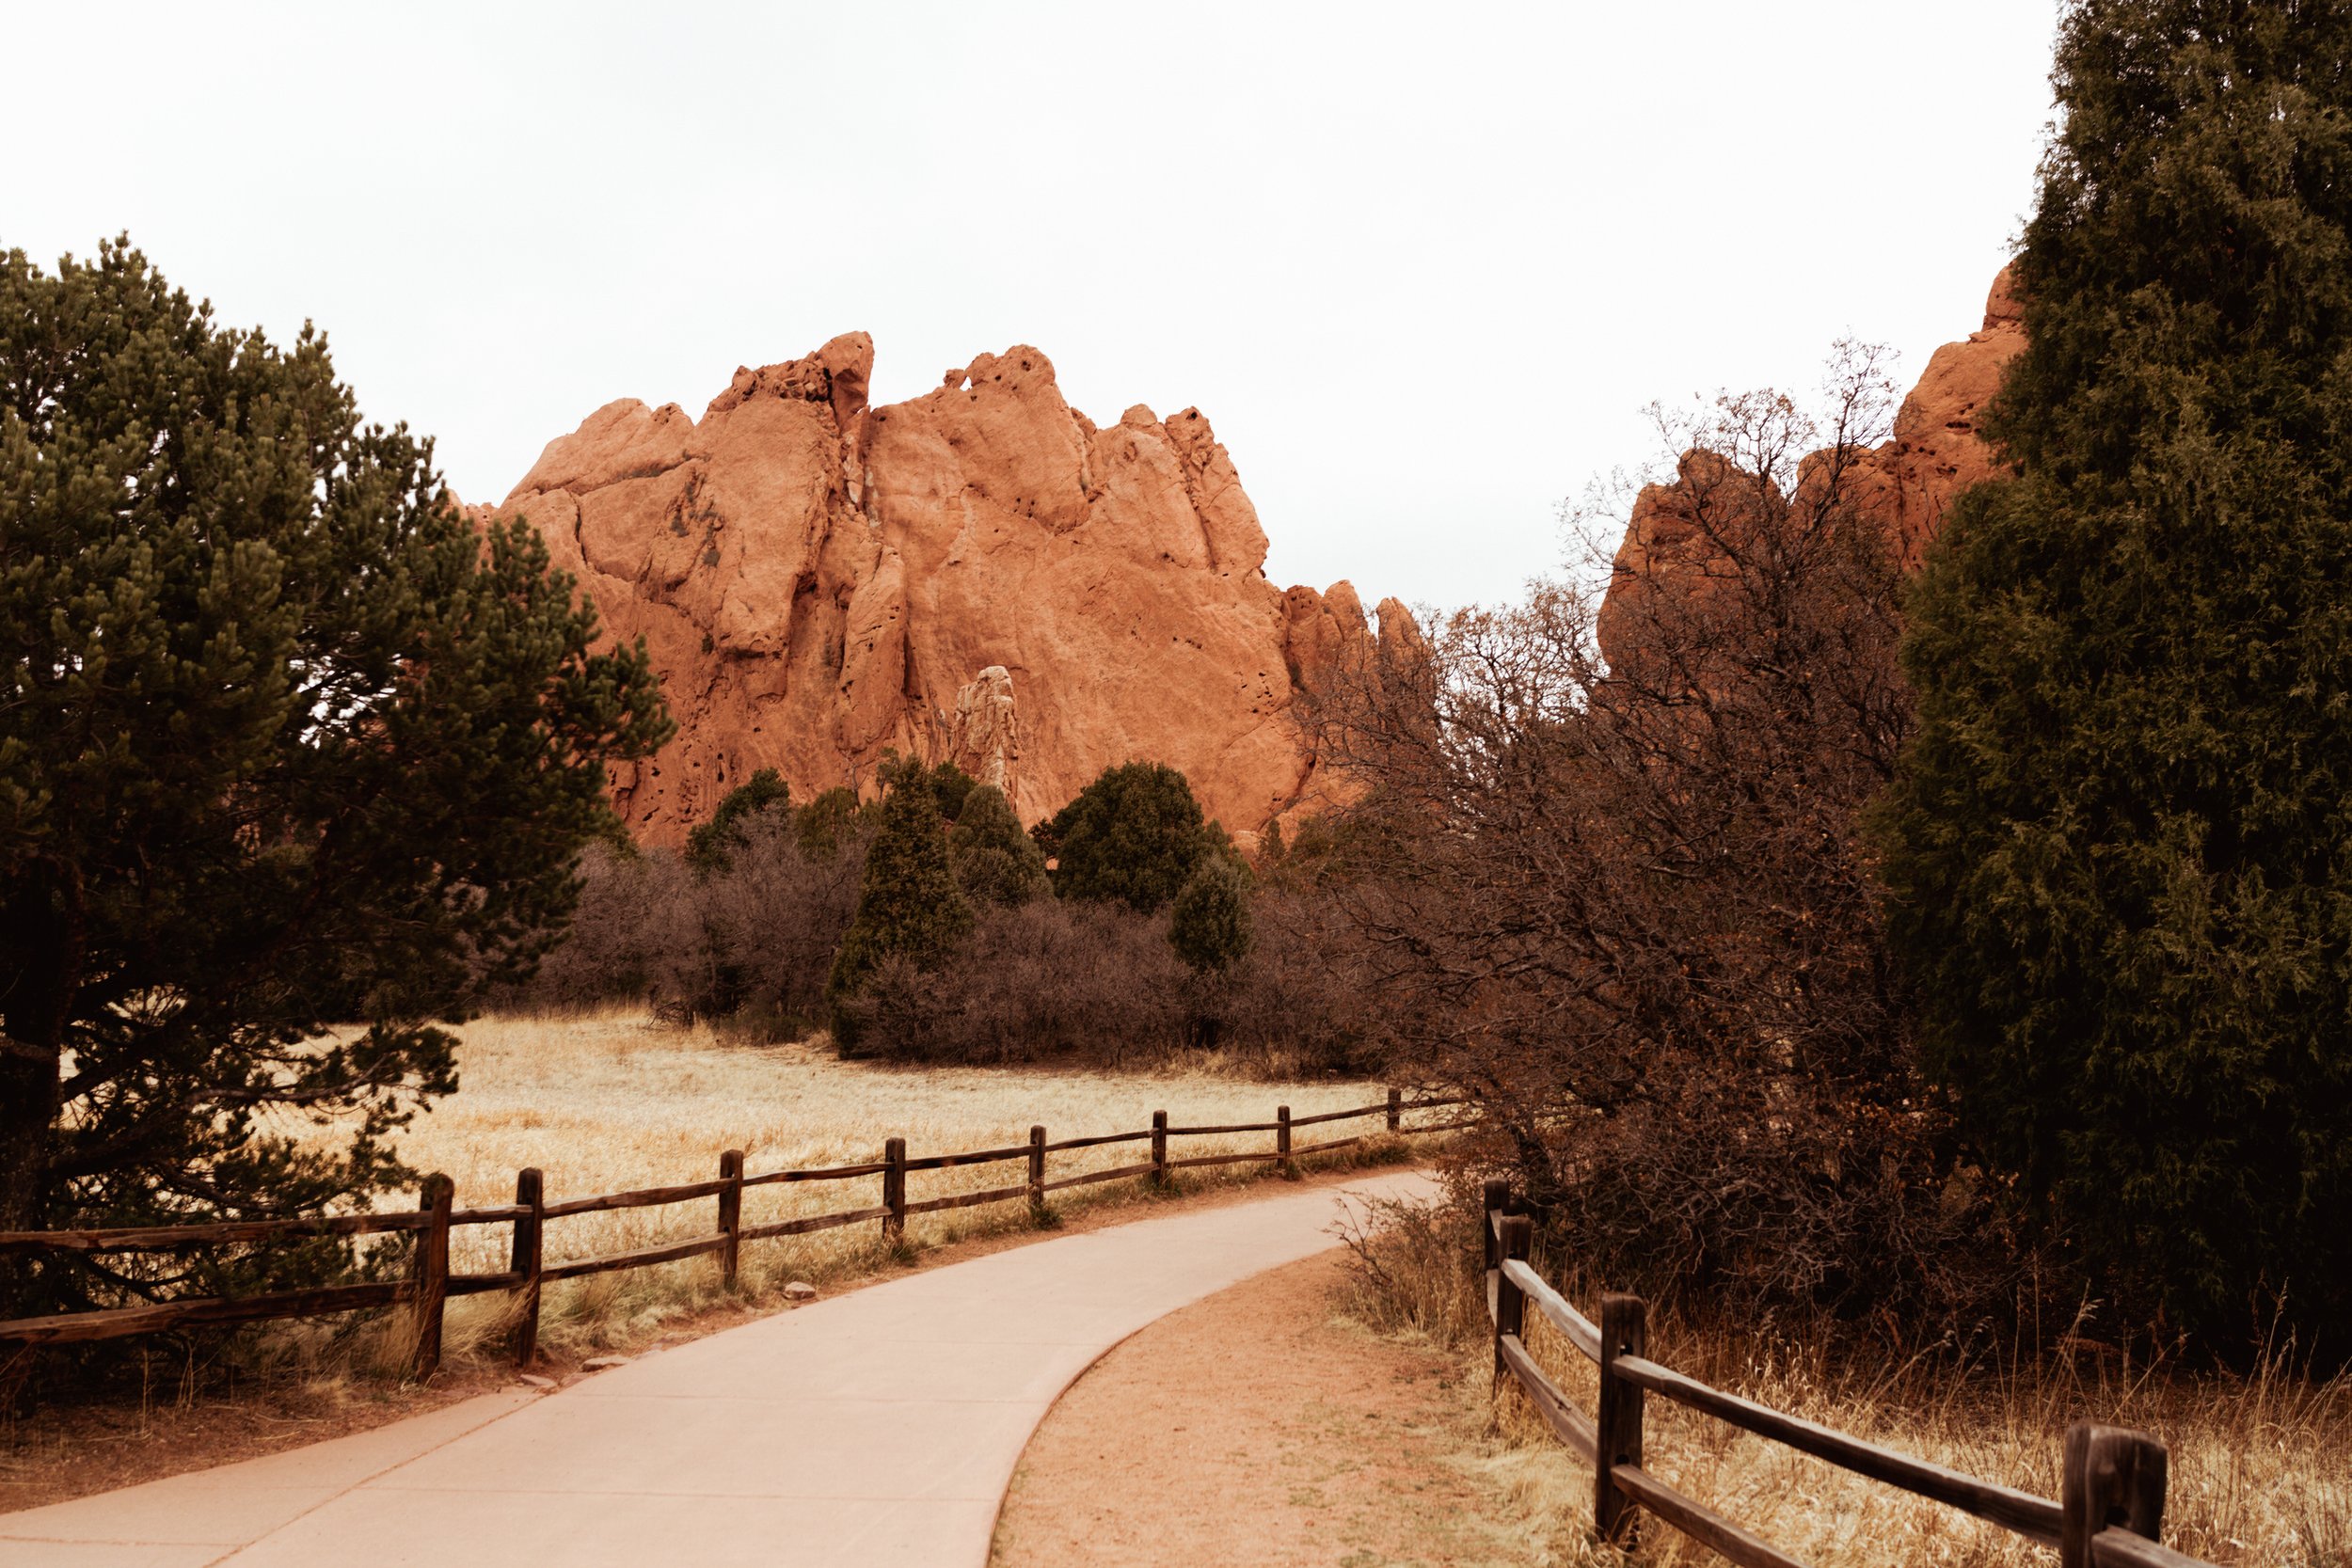 Paved trail pathways through red sandstone geological formations at Garden of the Gods | Adventure photographer Kept Record